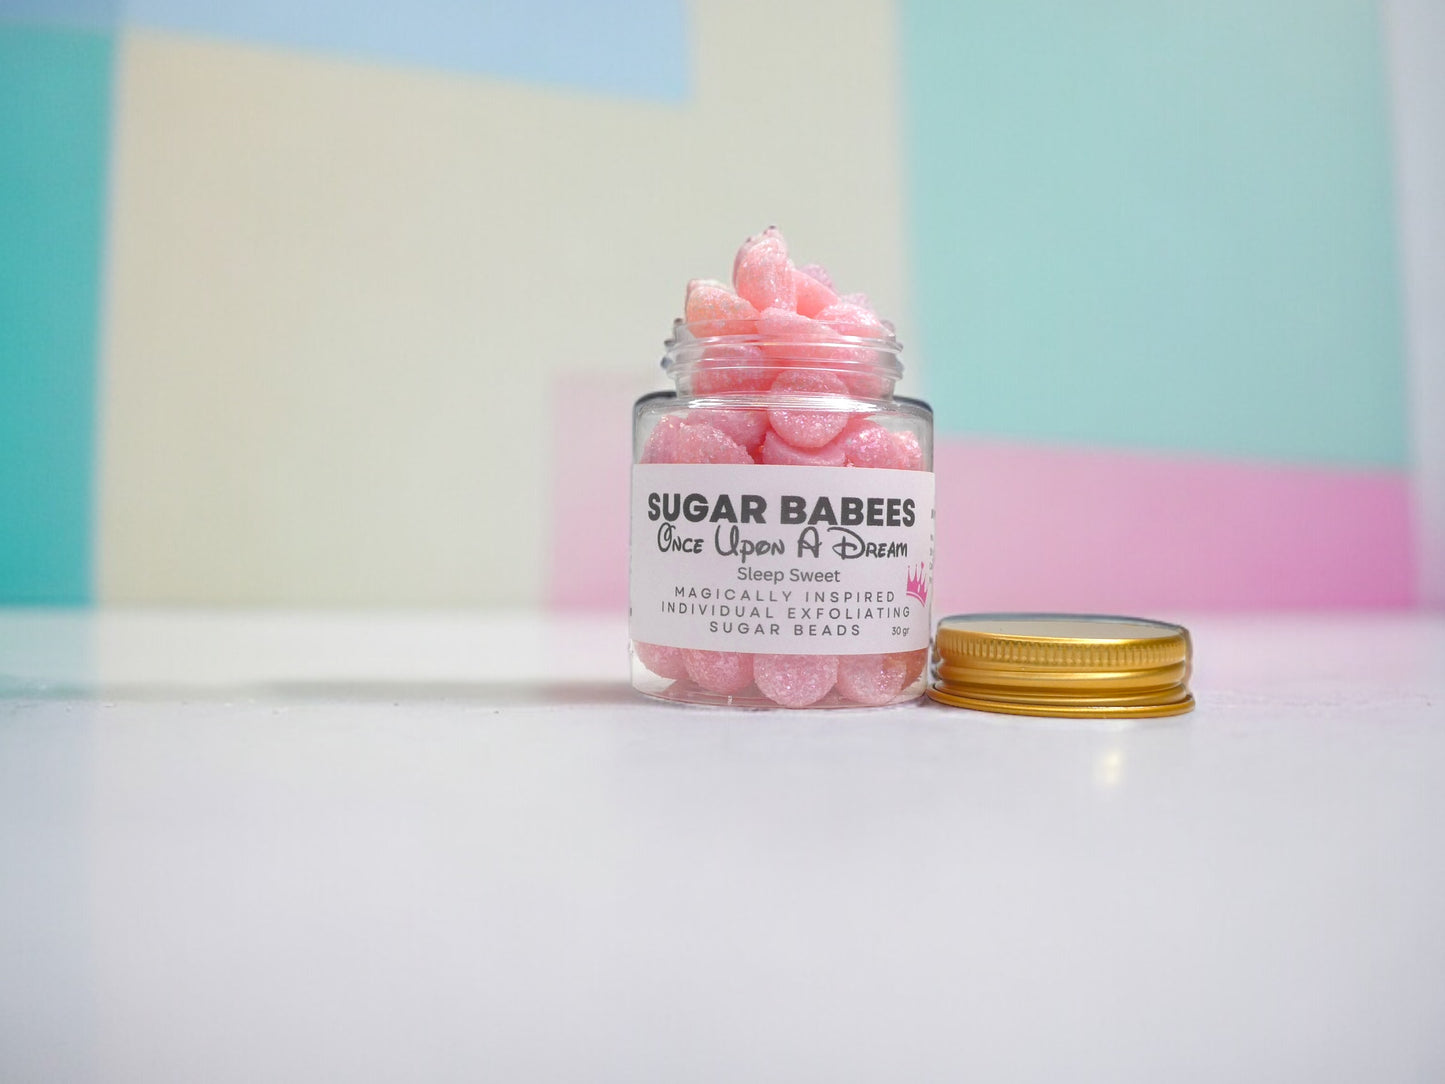 “Once Upon A Dream” Exfoliating Sugar Babees